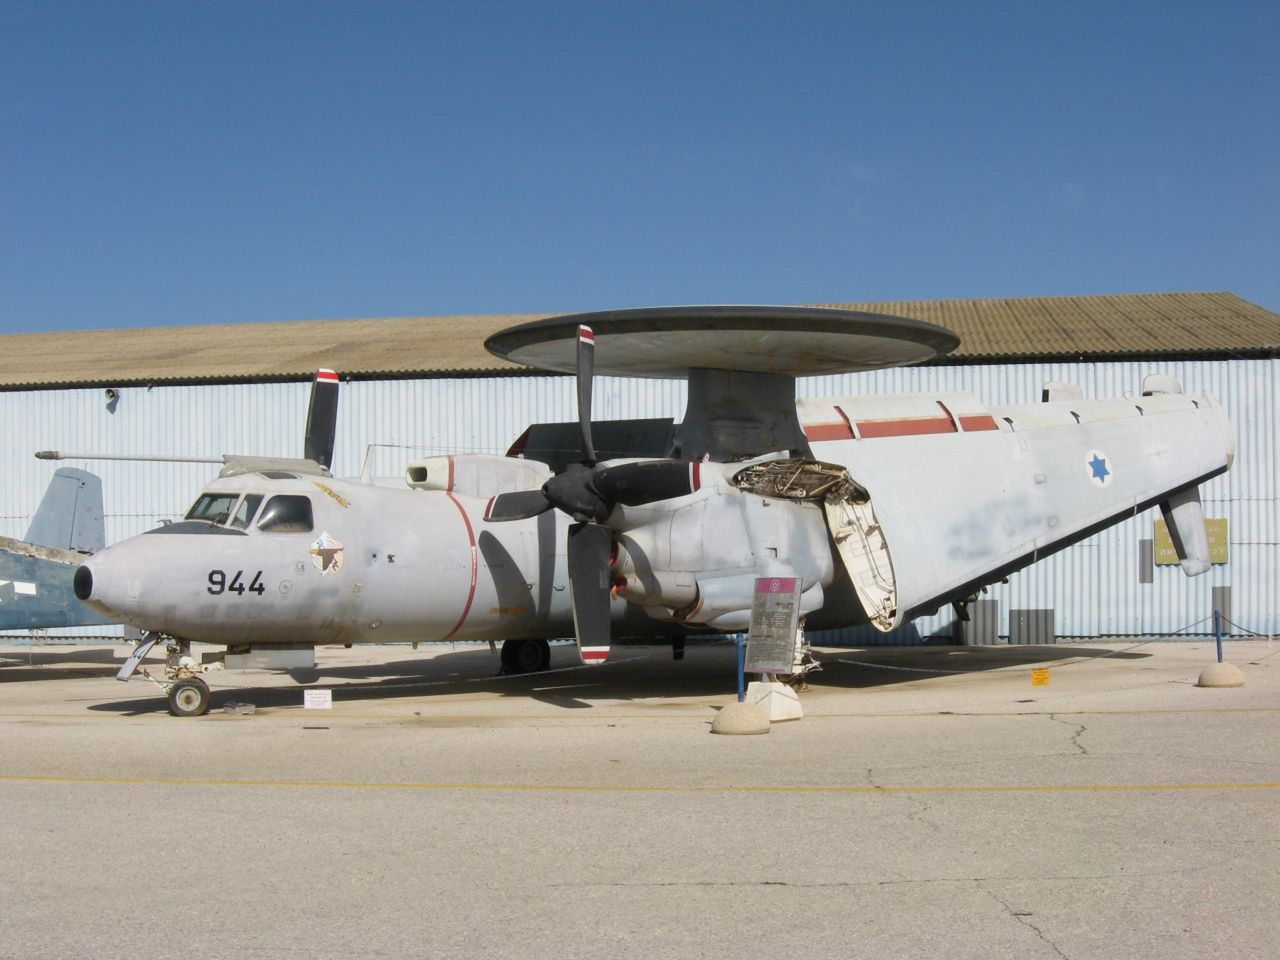 Israeli AWACS E-2 - currently in a museum